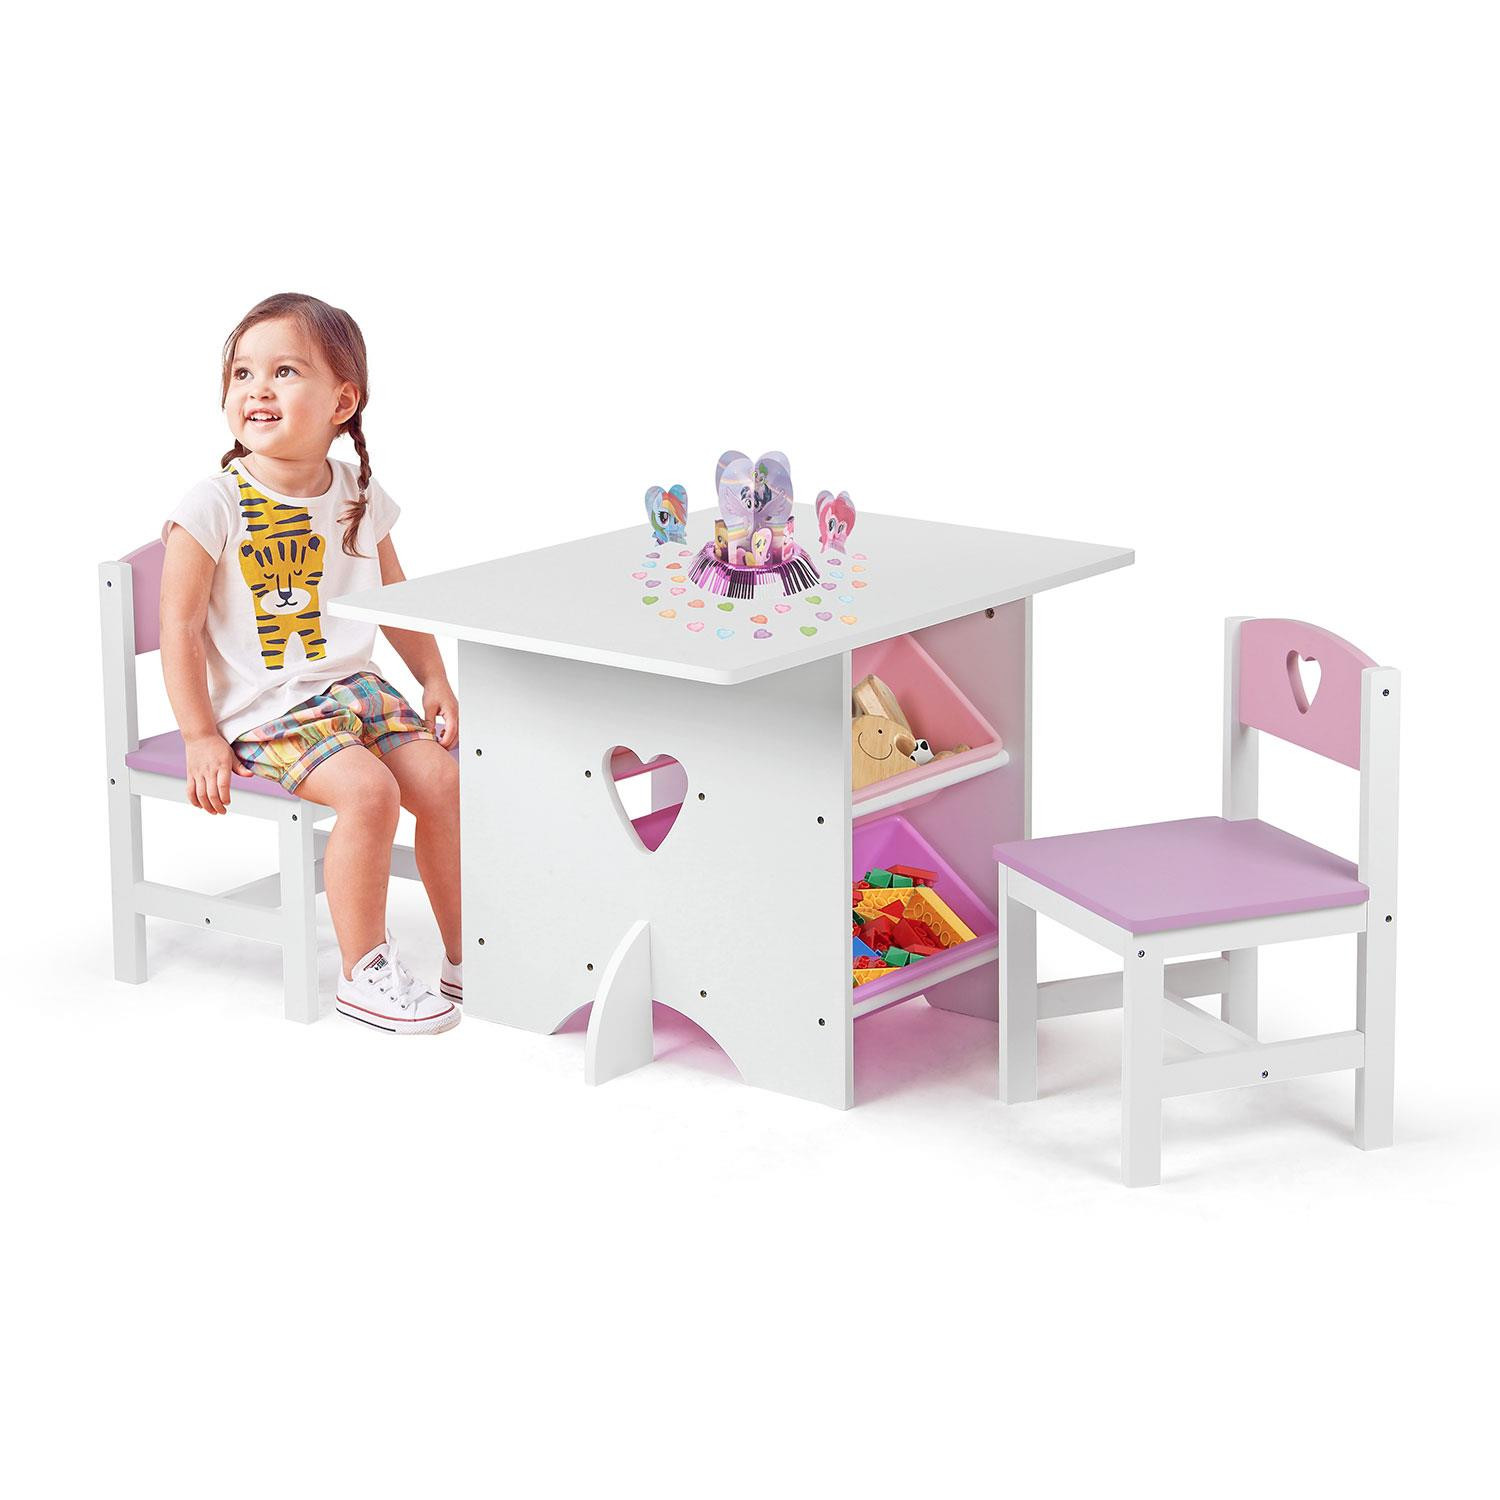 Children'S Table With Storage
 Wooden Kids Children s Nursery Play Table and 2 Chairs Set